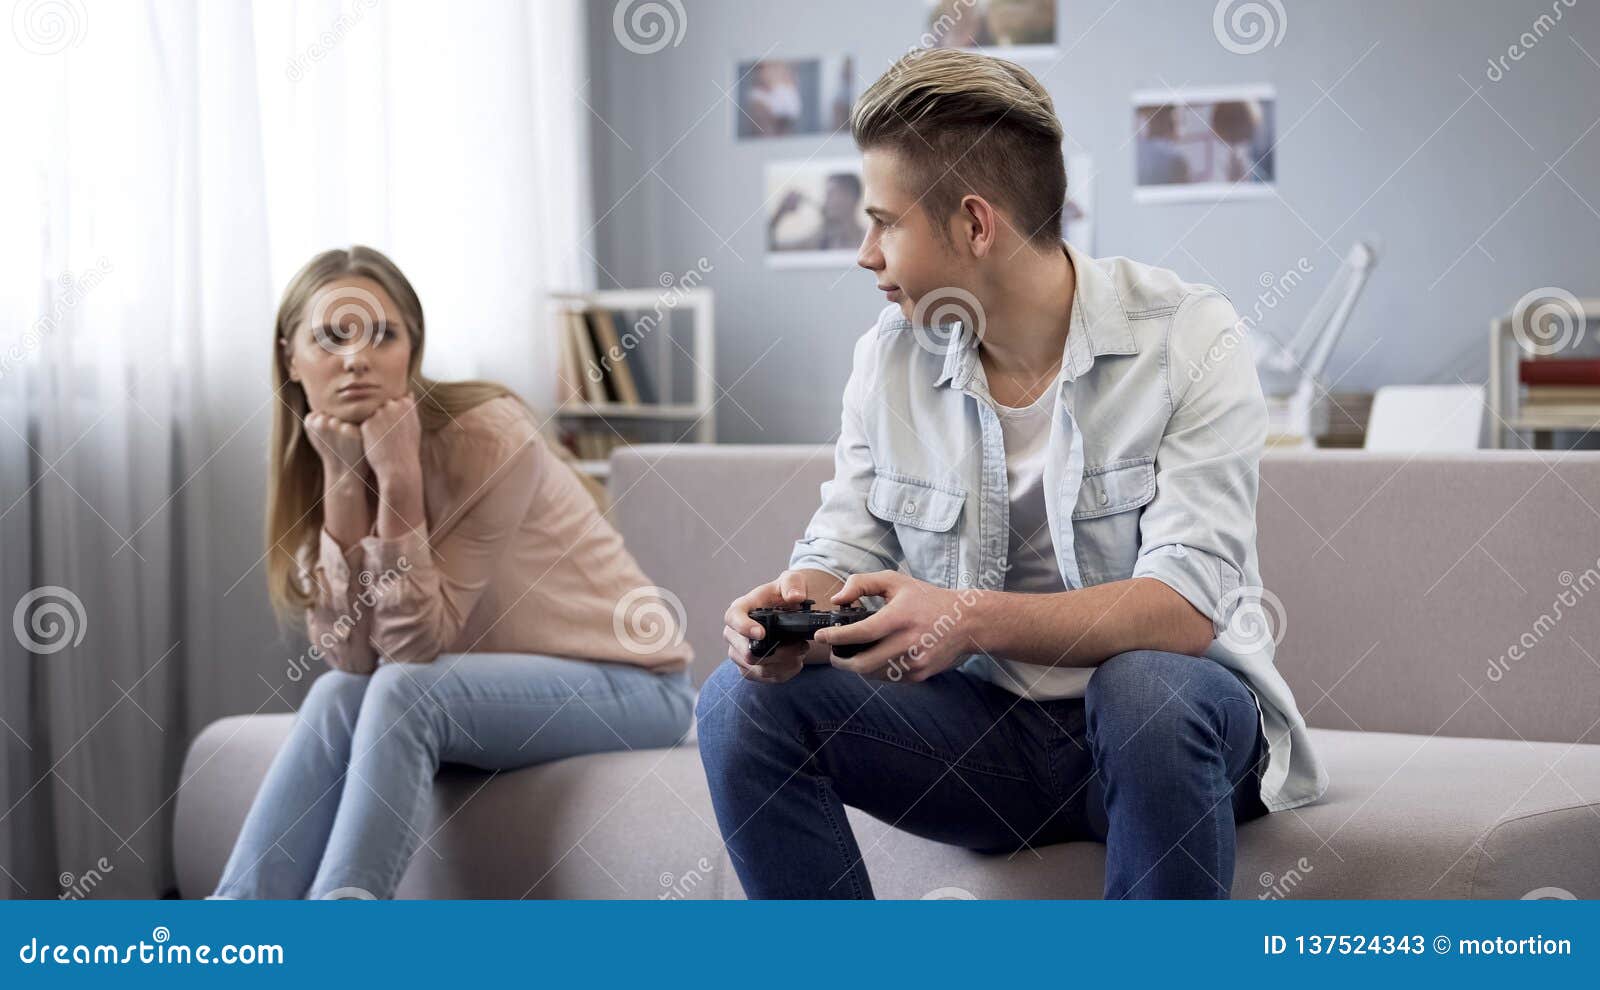 110+ Boyfriend Plays Video Game While Girlfriend Bored Stock